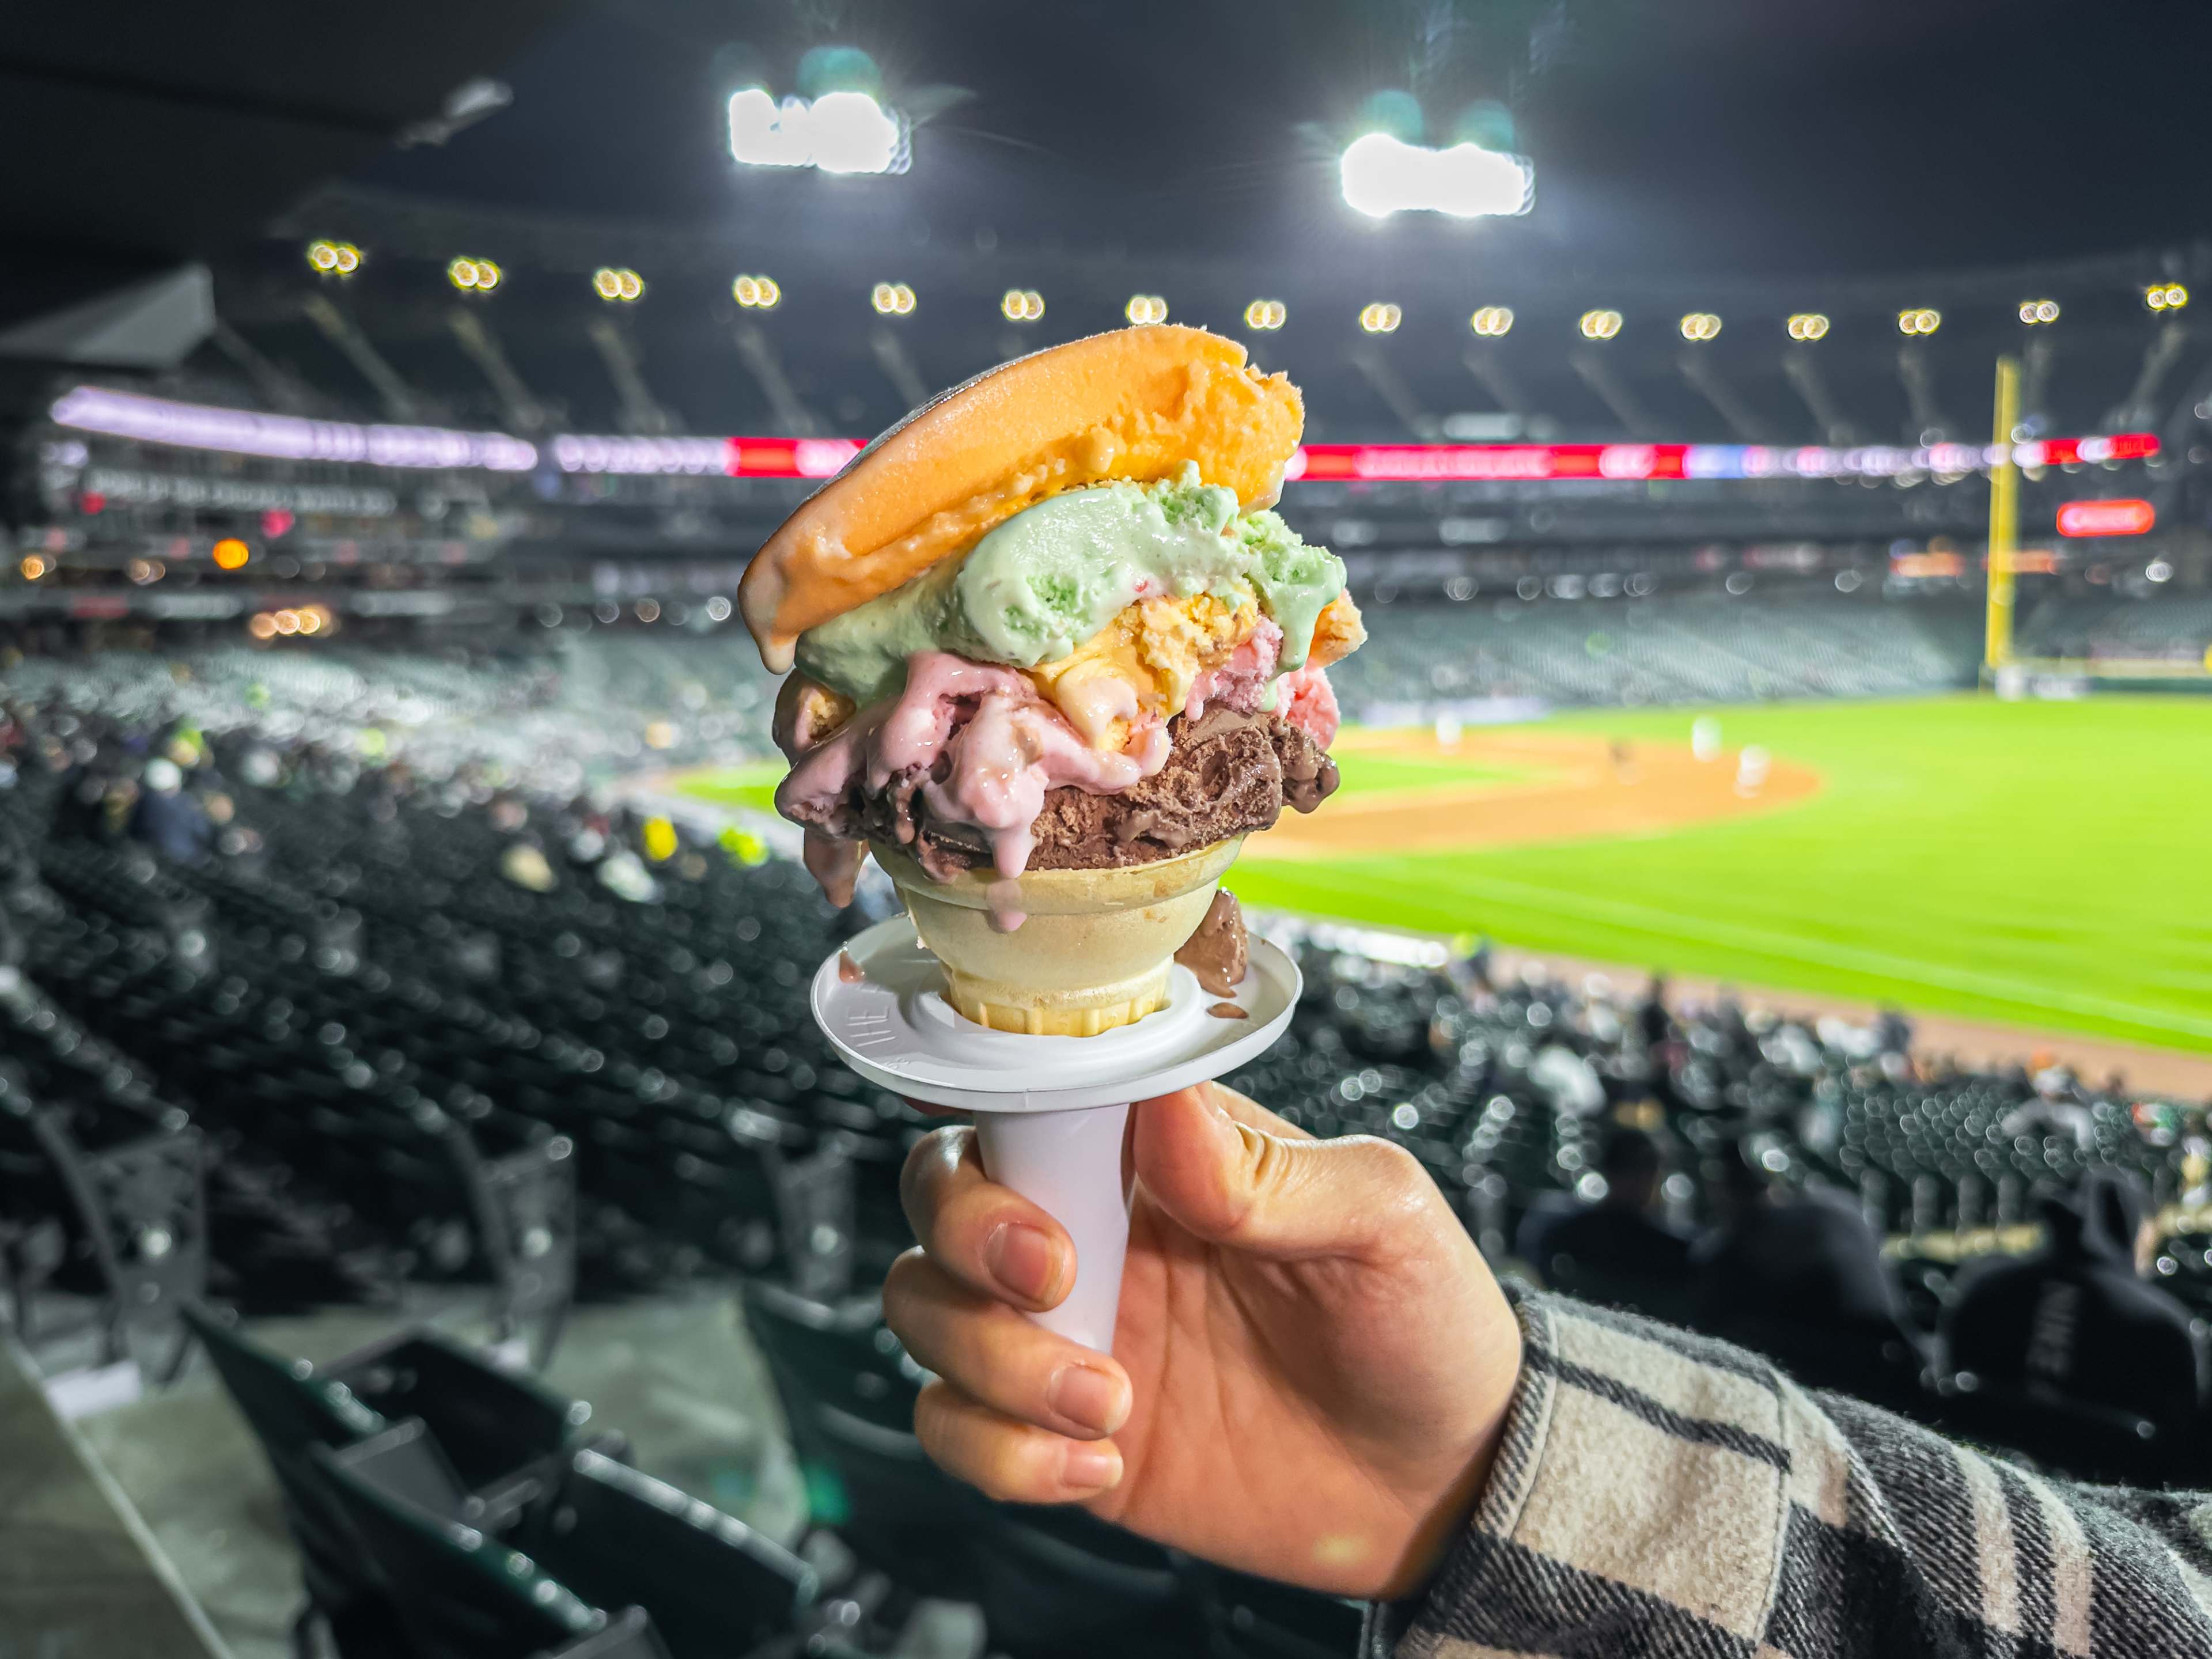 Rainbow cone held up in front of a baseball diamond and stadium seating